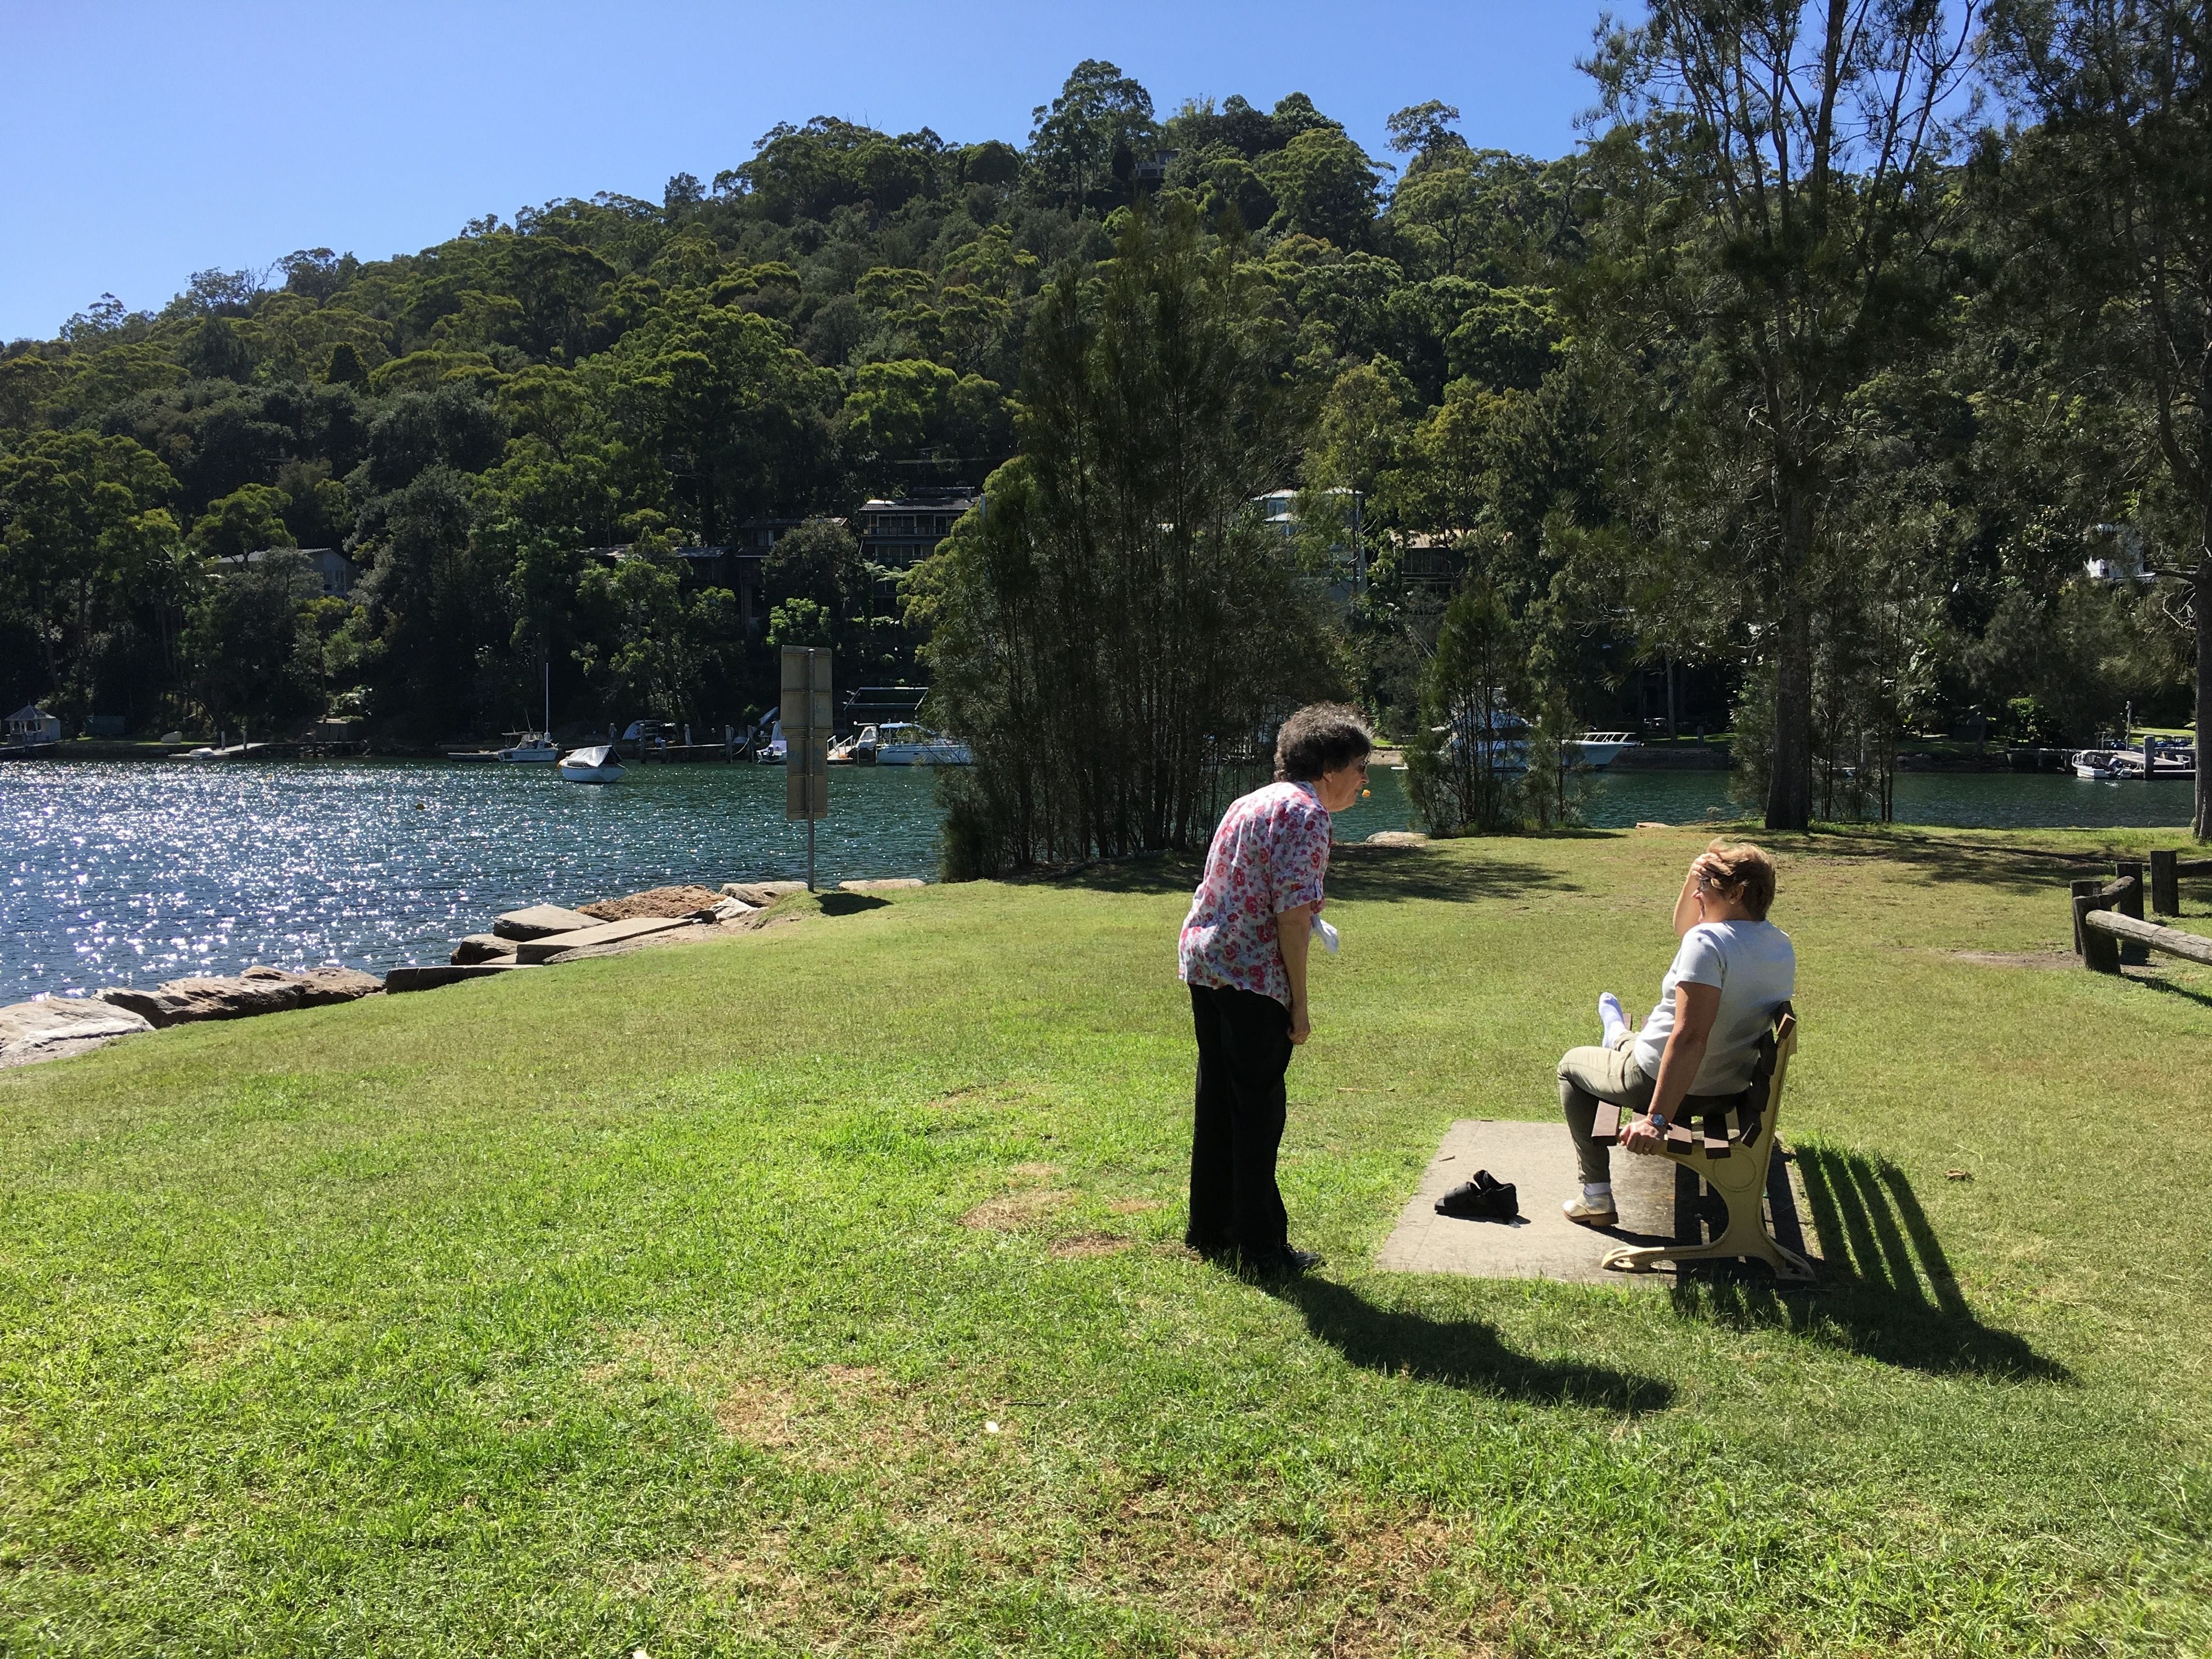 Northern Beaches Public Day Tour febuary 2019 Image -5c649668bc63b